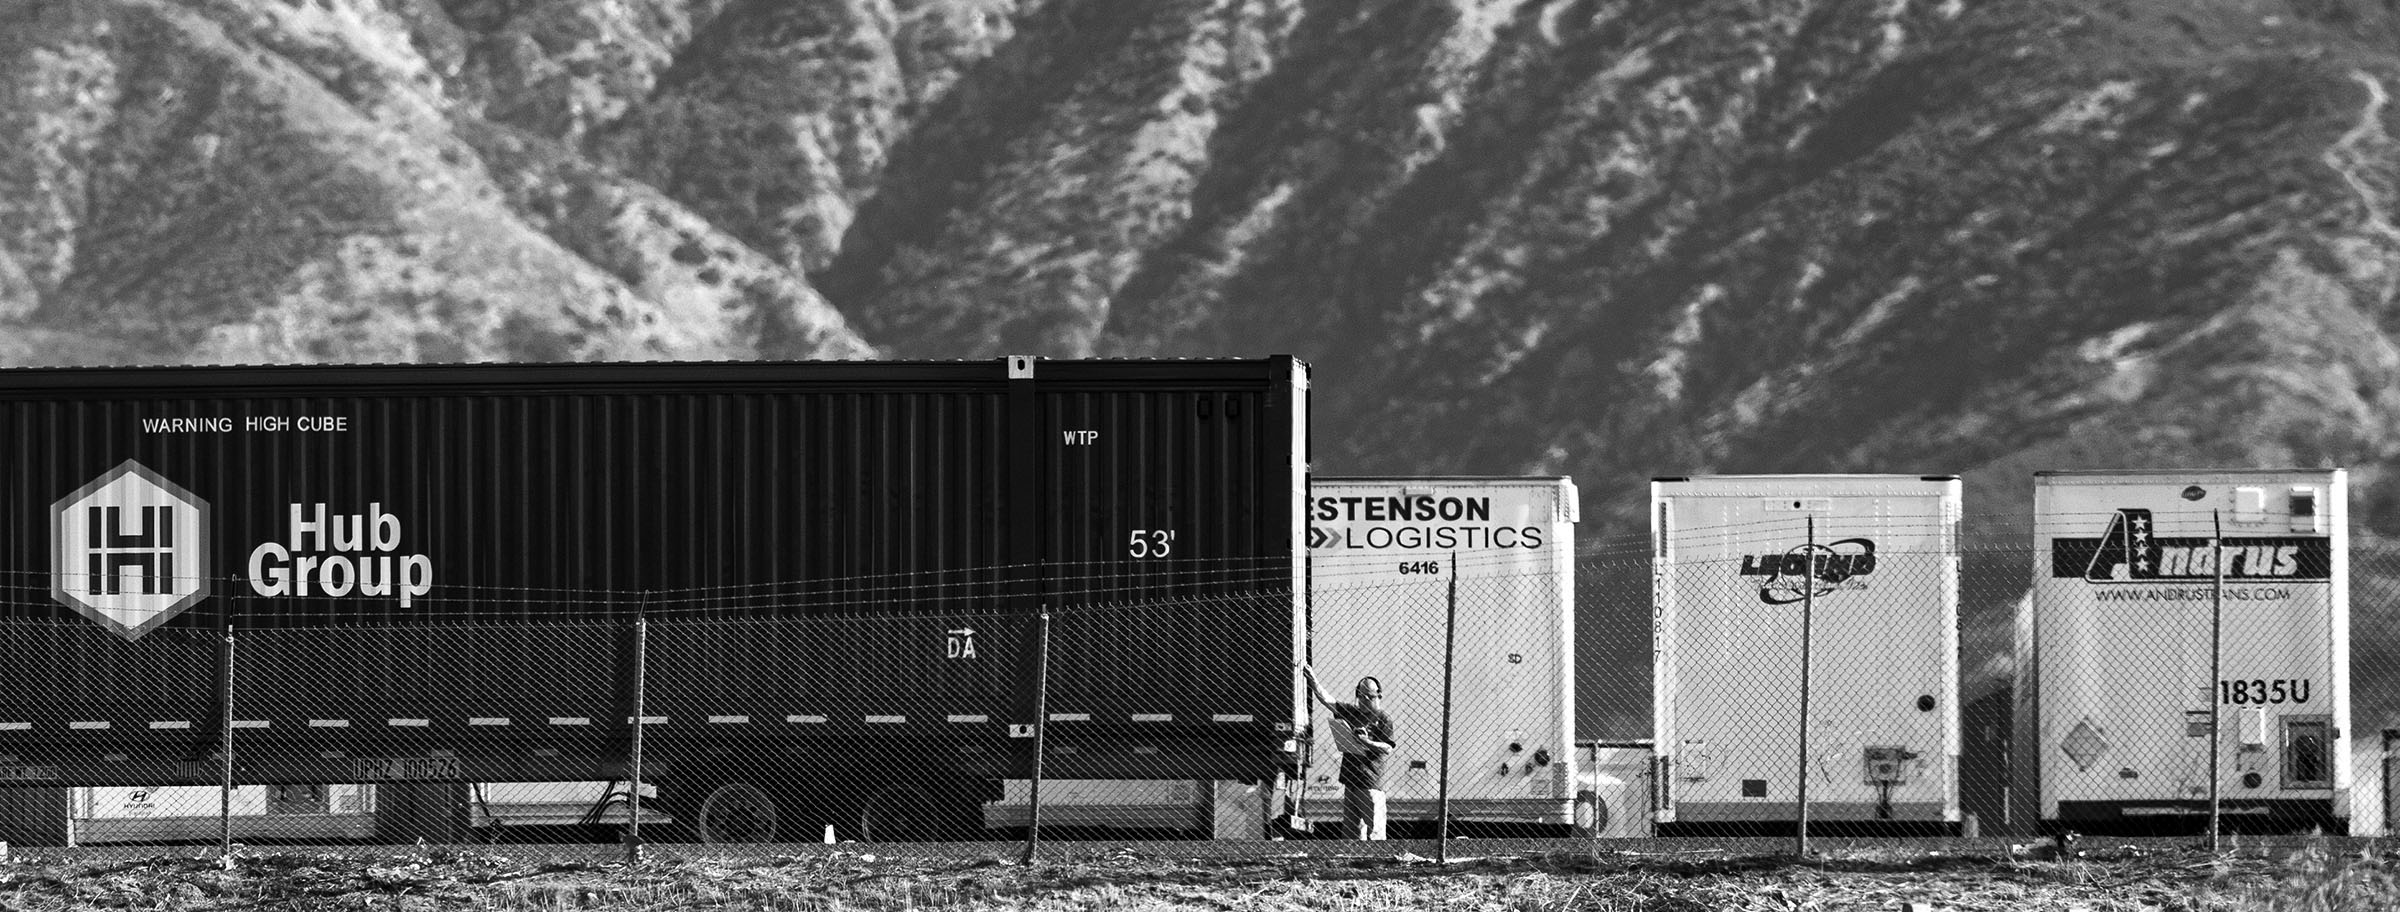 A lone trucker at work. San Bernardino has long been a transportation/distribution hub for the west coast of the United States. Trains, trucks, airplanes all converge there to distribute goods creating a heavy pollution burden on the area. In addition, much of the pollution from the LA/Orange County basin gets trapped there by converging mountain ranges as daily ocean winds push pollutants inland.